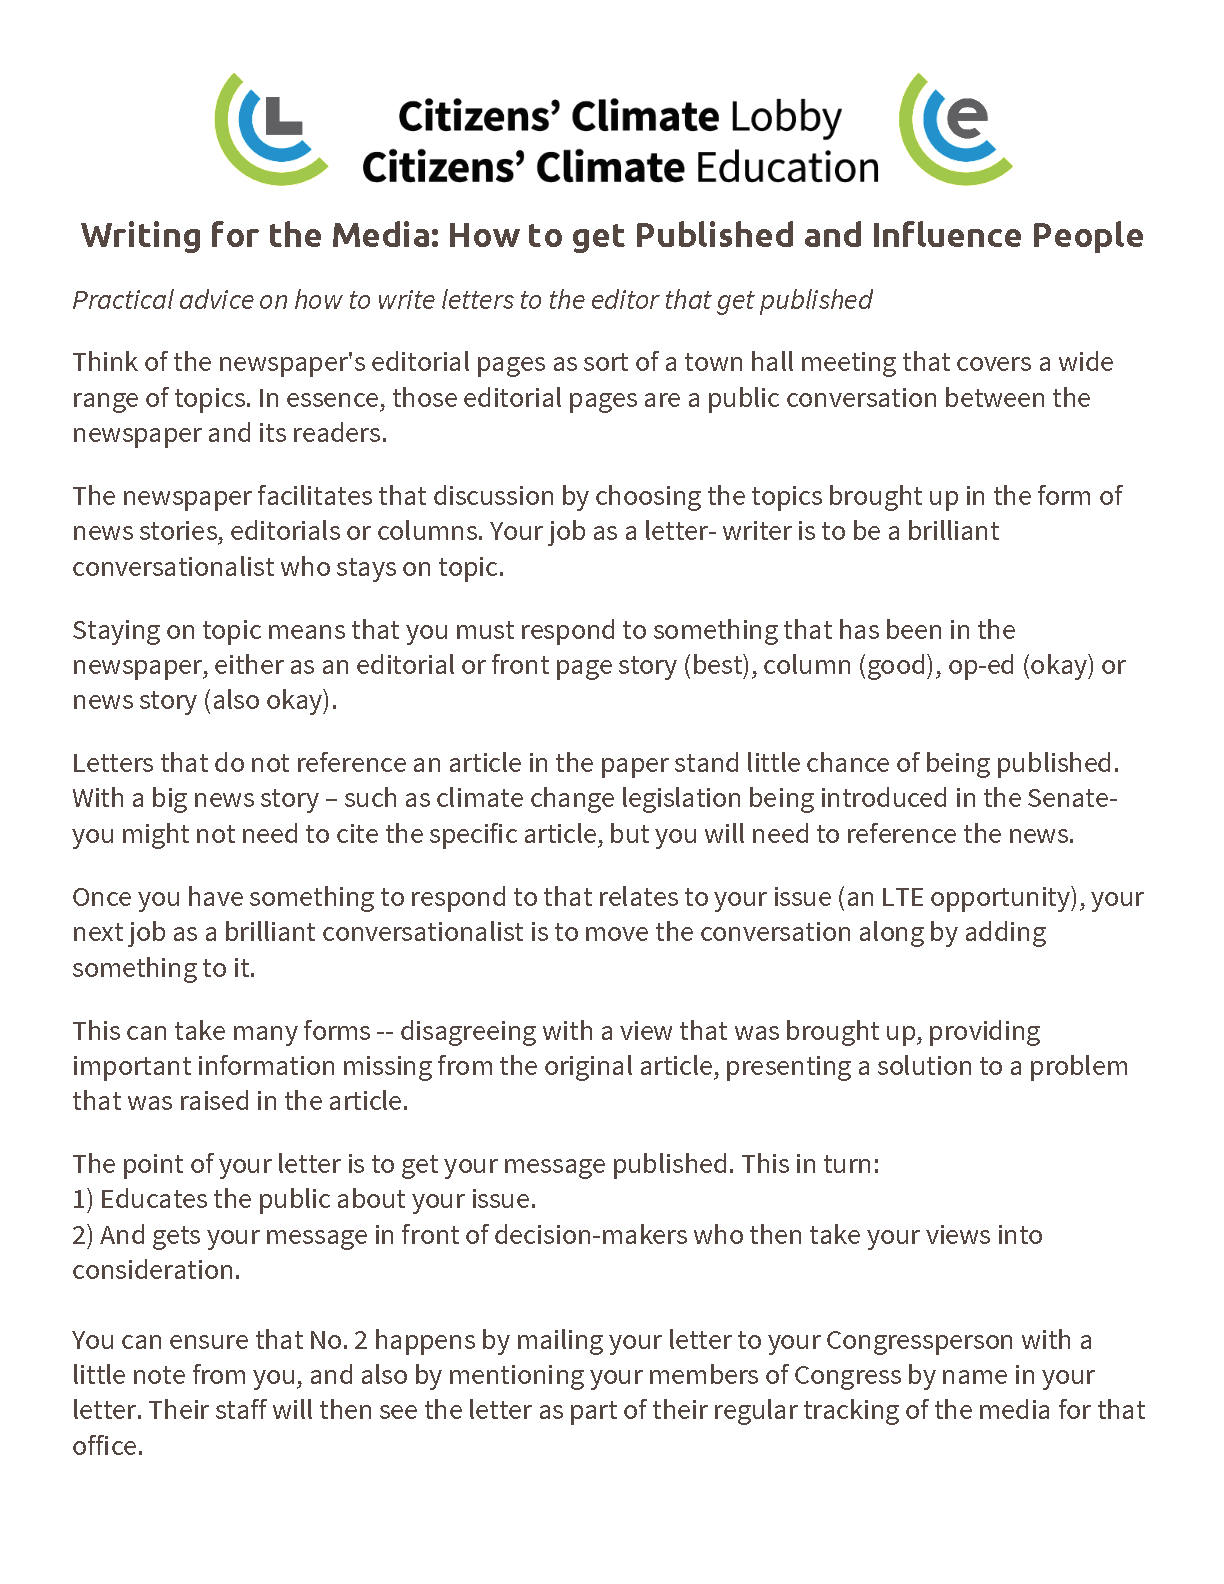 how-to-get-published_Page_1.png